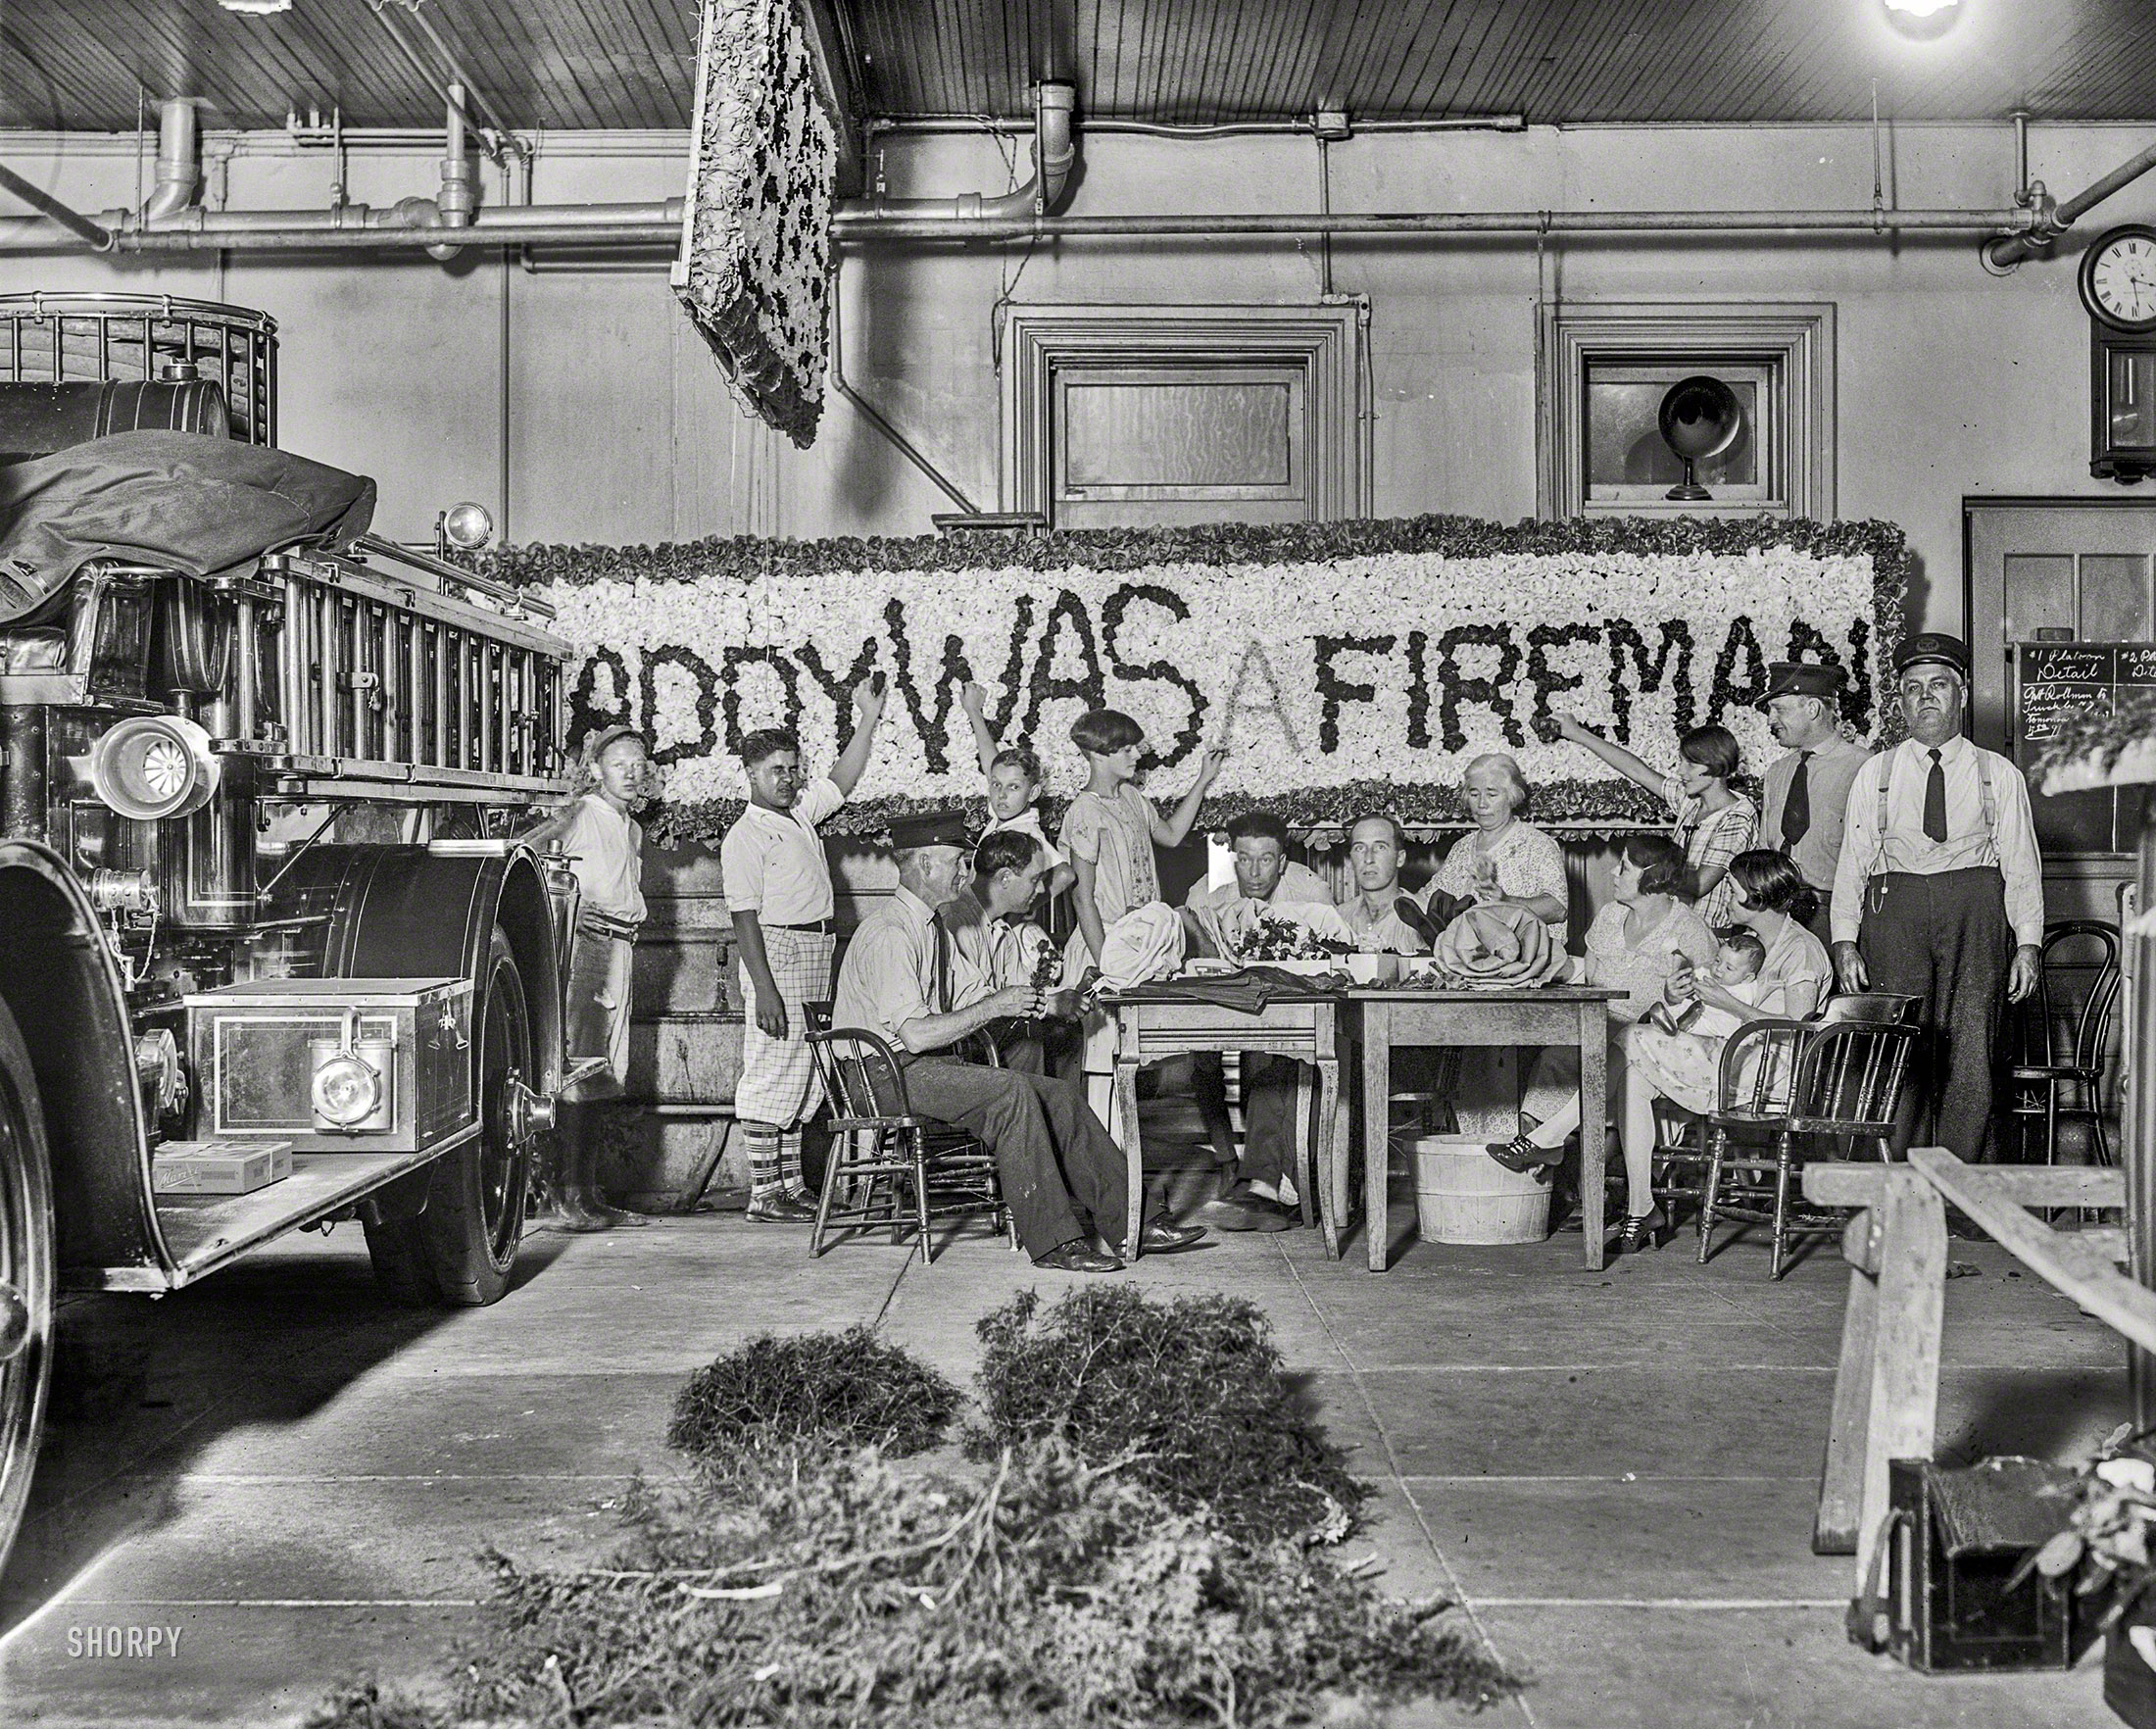 Washington, D.C., circa 1928. "Fire Dept. truck decorating." National Photo Company Collection glass negative. View full size.